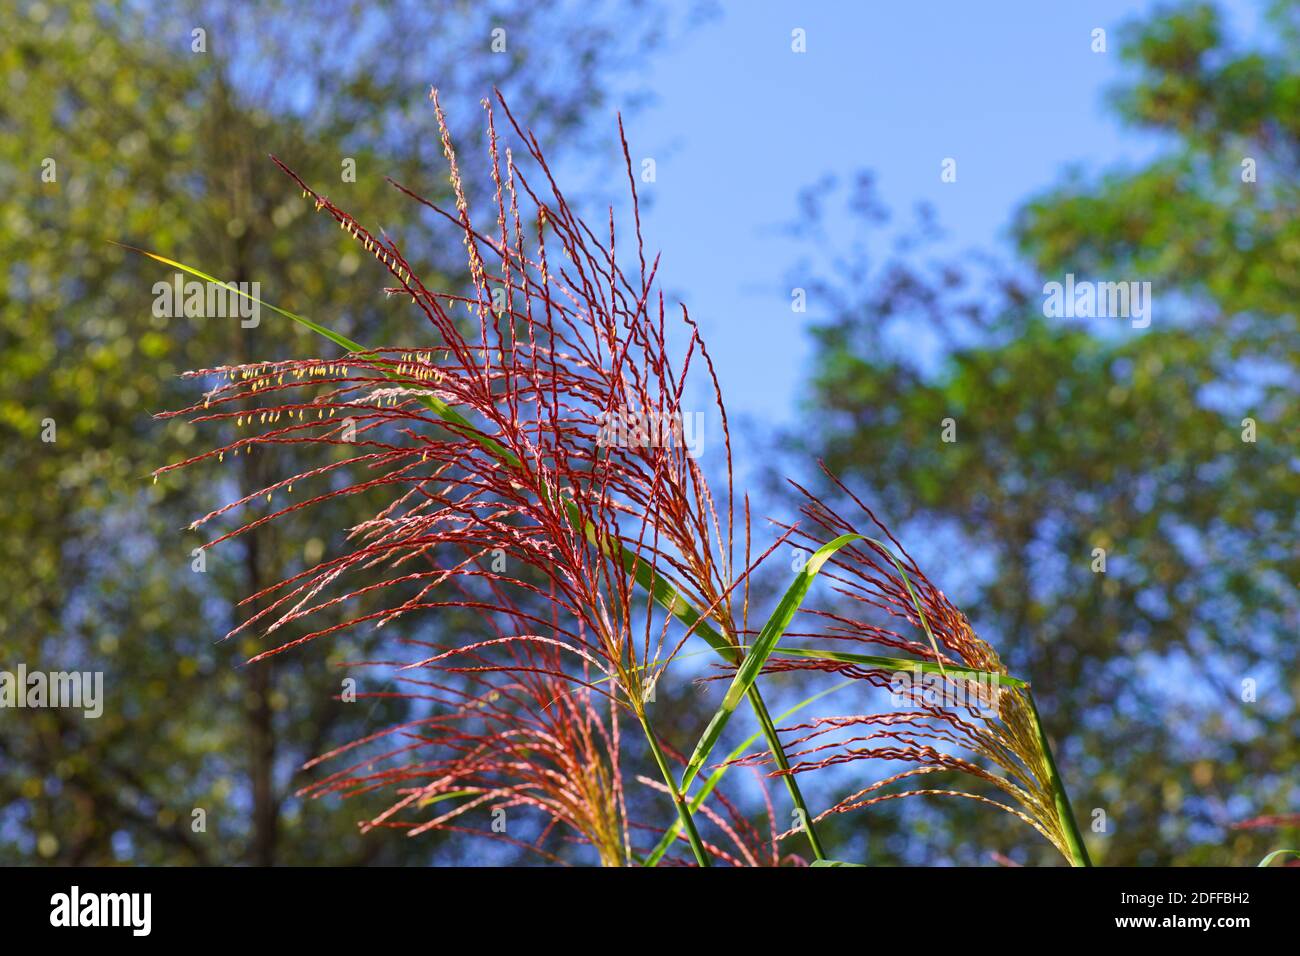 Miscanthus sinensis, the maiden silvergrass, is a species of flowering plant in the grass family Poaceae. Autumn in the garden. Stock Photo